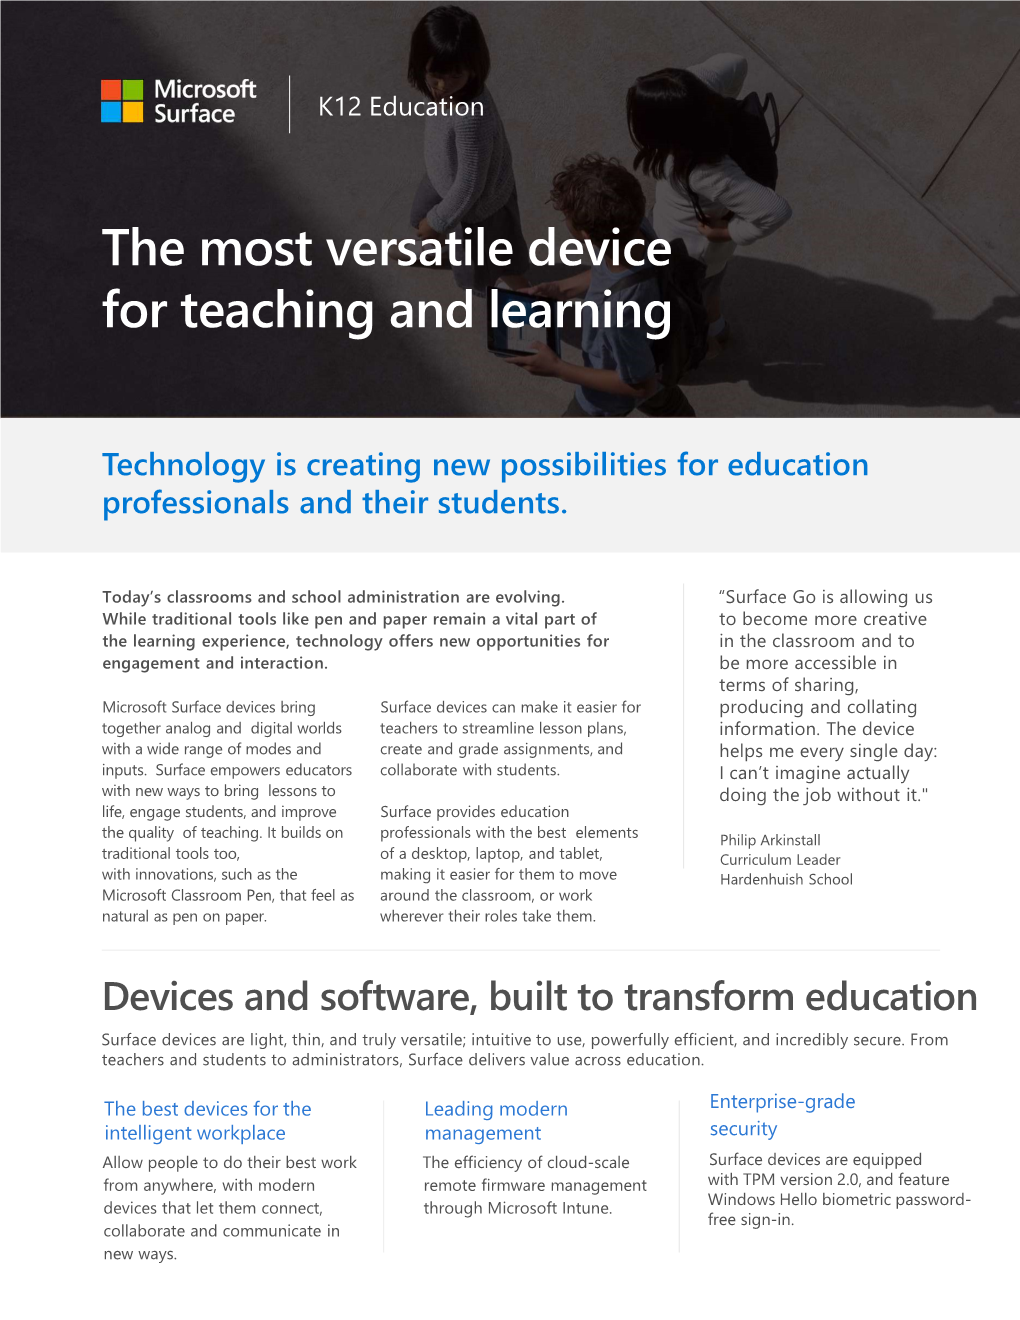 The Most Versatile Device for Teaching and Learning